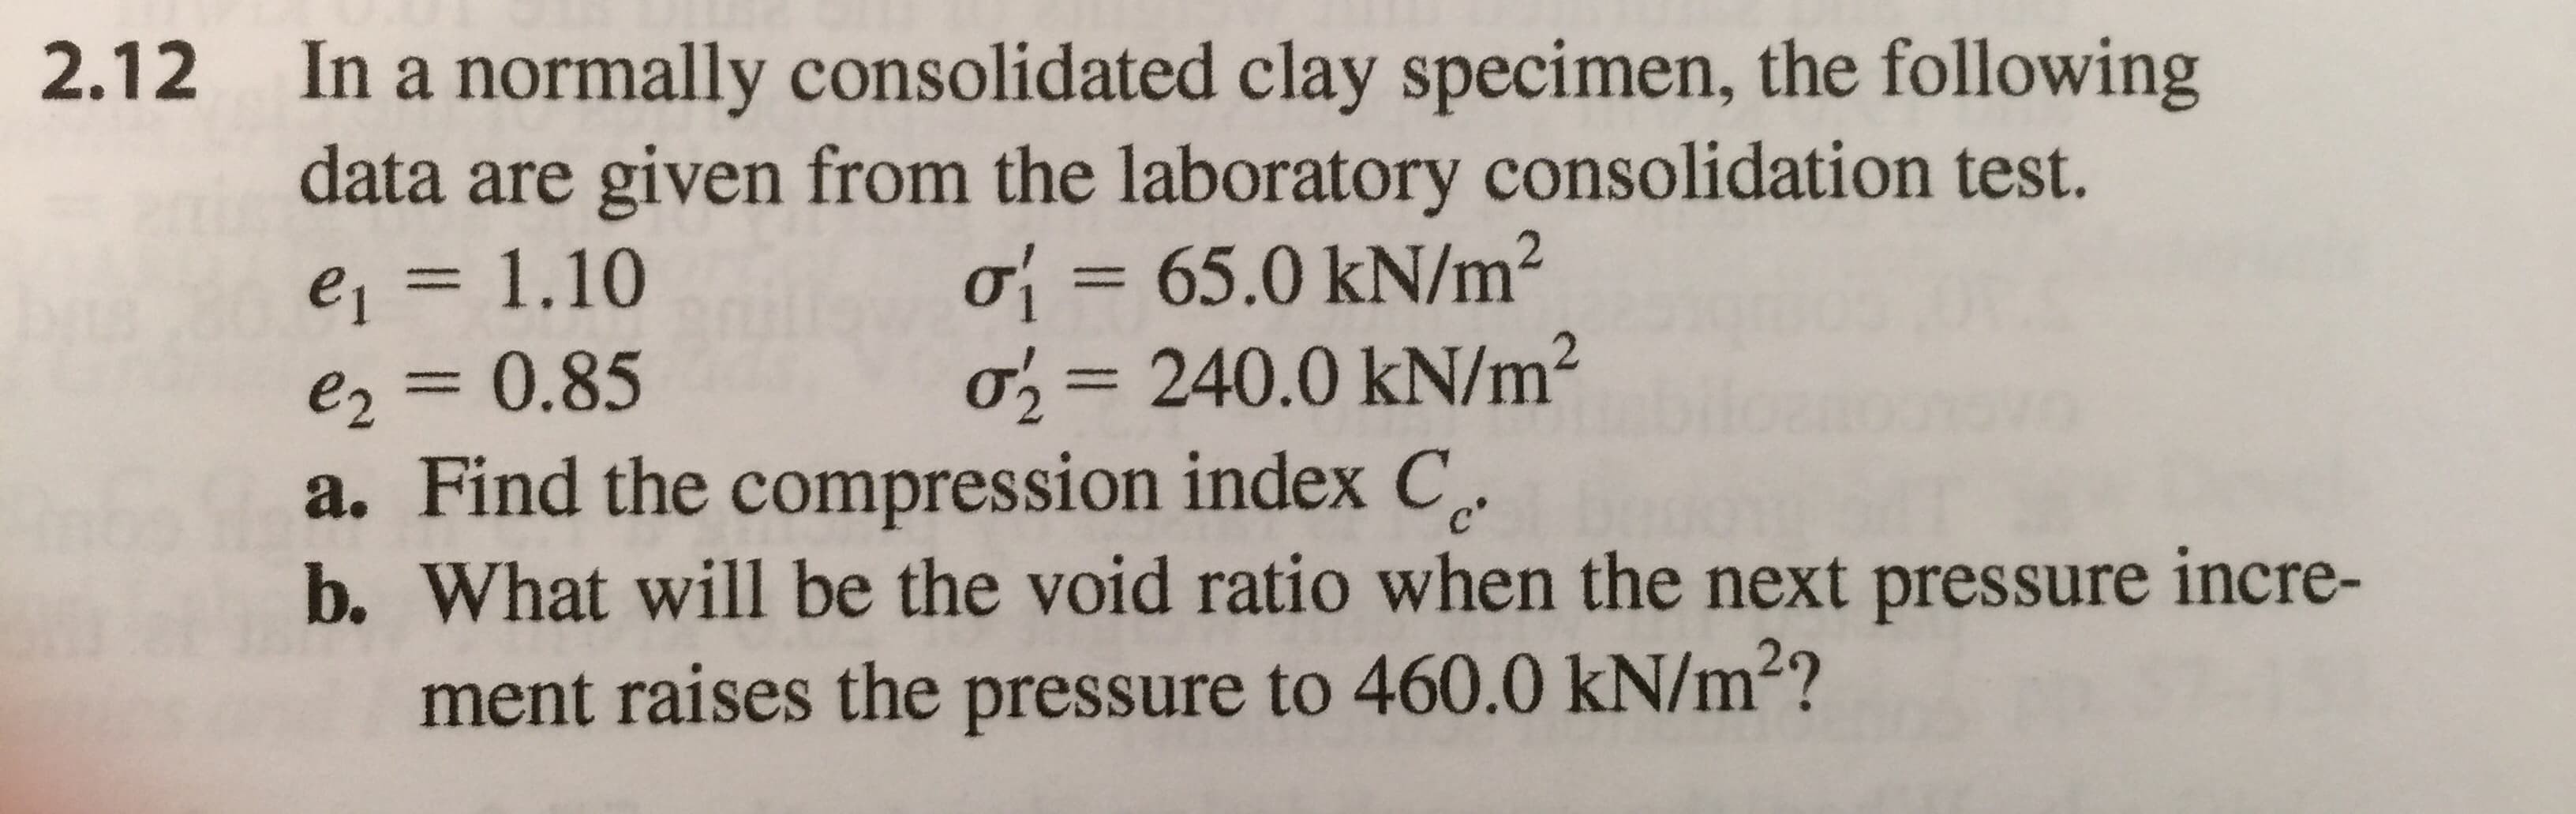 In a normally consolidated clay specimen, the following
are given from the laboratory consolidation test.
ơ -65.0 kN/m2
o 240.0 kN/m2
2.12
data
e2 0.85
a. Find the compression index C
b. What will be the void ratio when the next pressure incre-
ment raises the pressure to 460.0 kN/m2?
